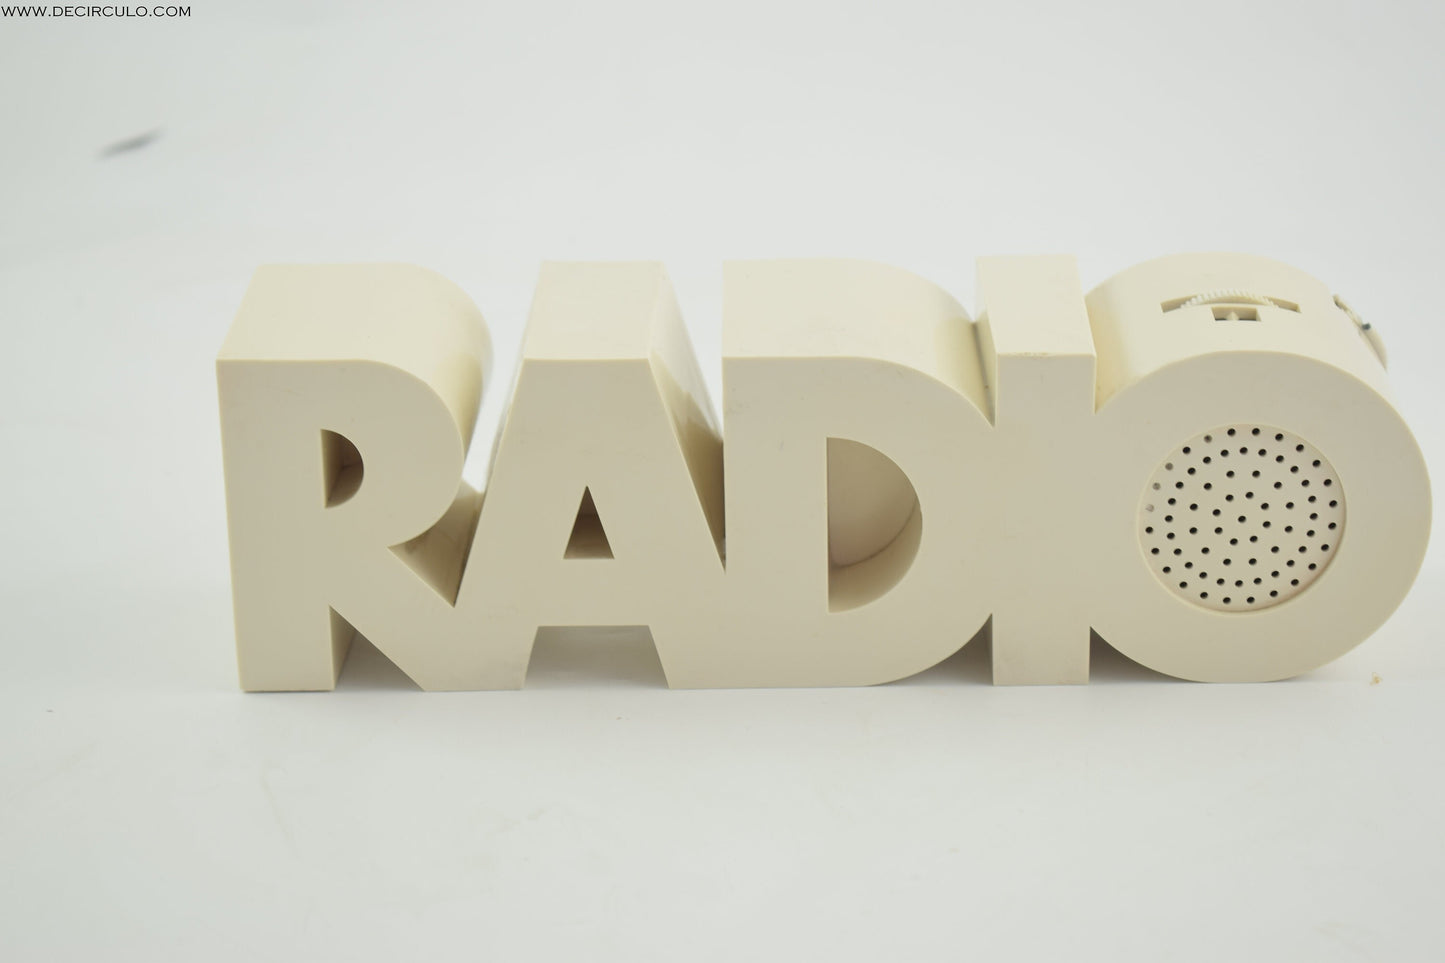 Radio radio Model in the form of the word radio UKW and MW frequency